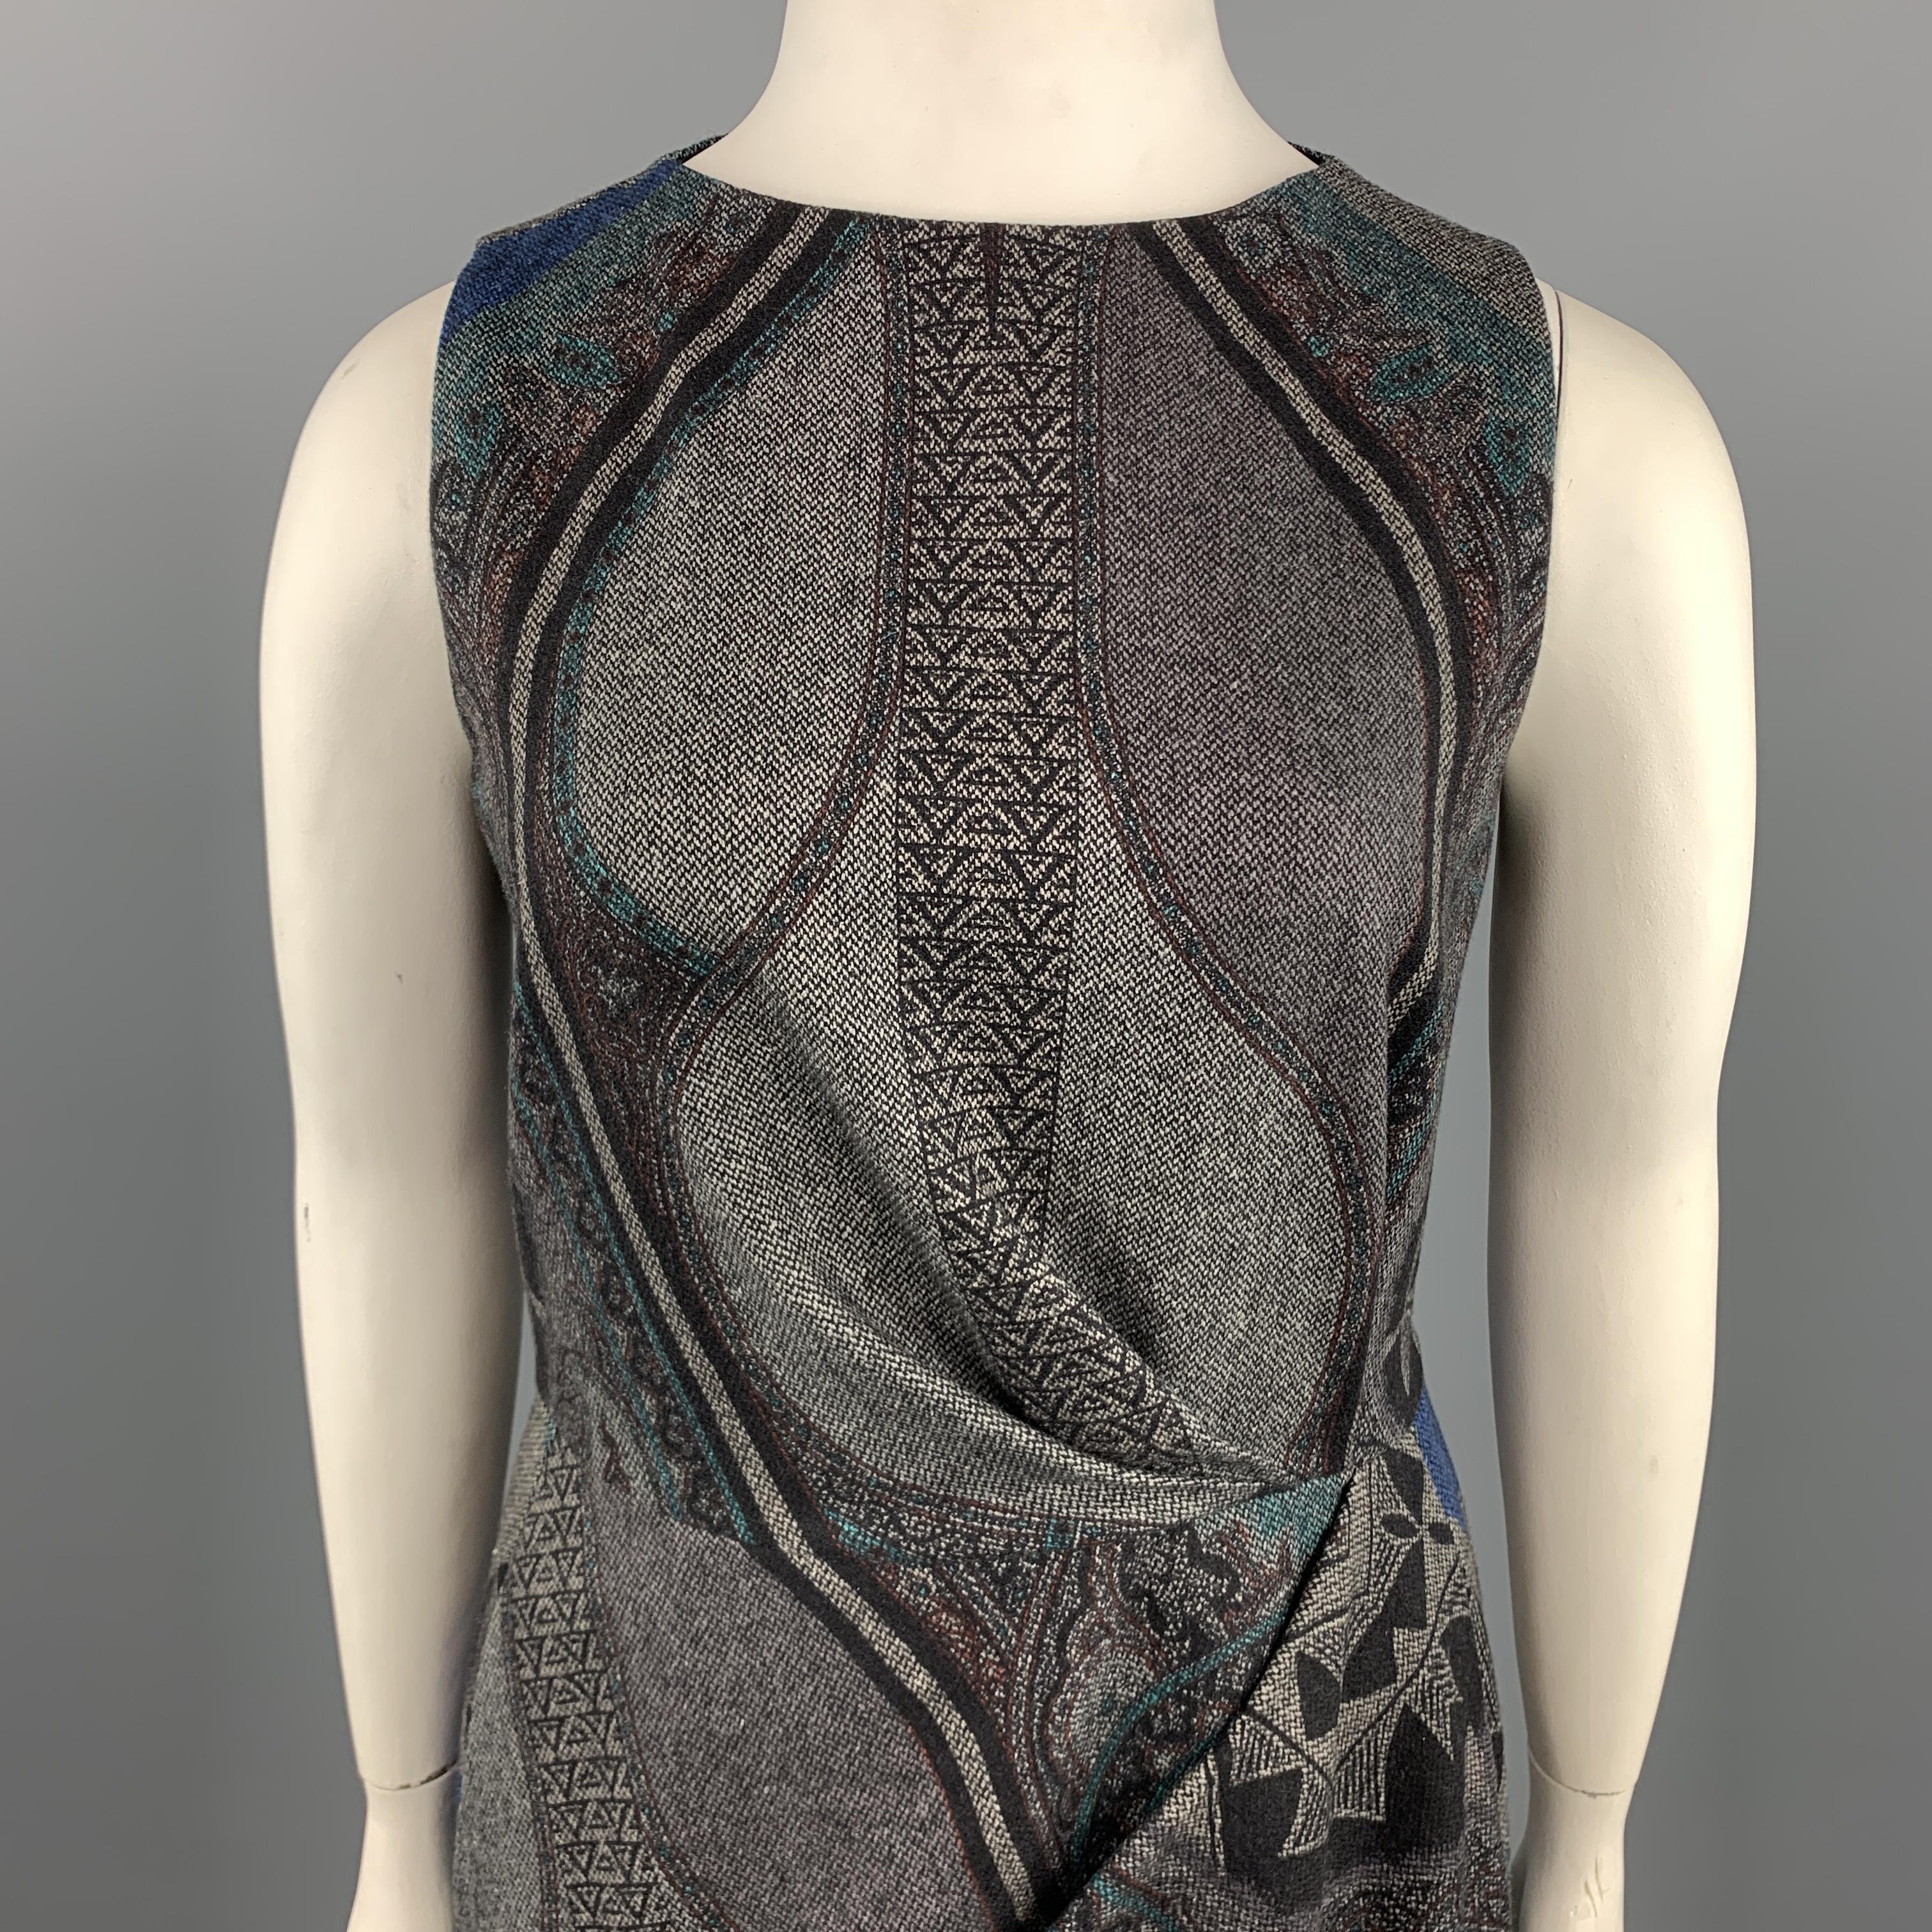 Sleeveless ETRO shift dress comes in a printed gray woven wool blend fabric with a round neckline, pockets, and asymmetrical drape front. Made in Italy.

Excellent Pre-Owned Condition. Retails: $2,100.00.
Marked: IT 48

Measurements:

l	Shoulder: 14